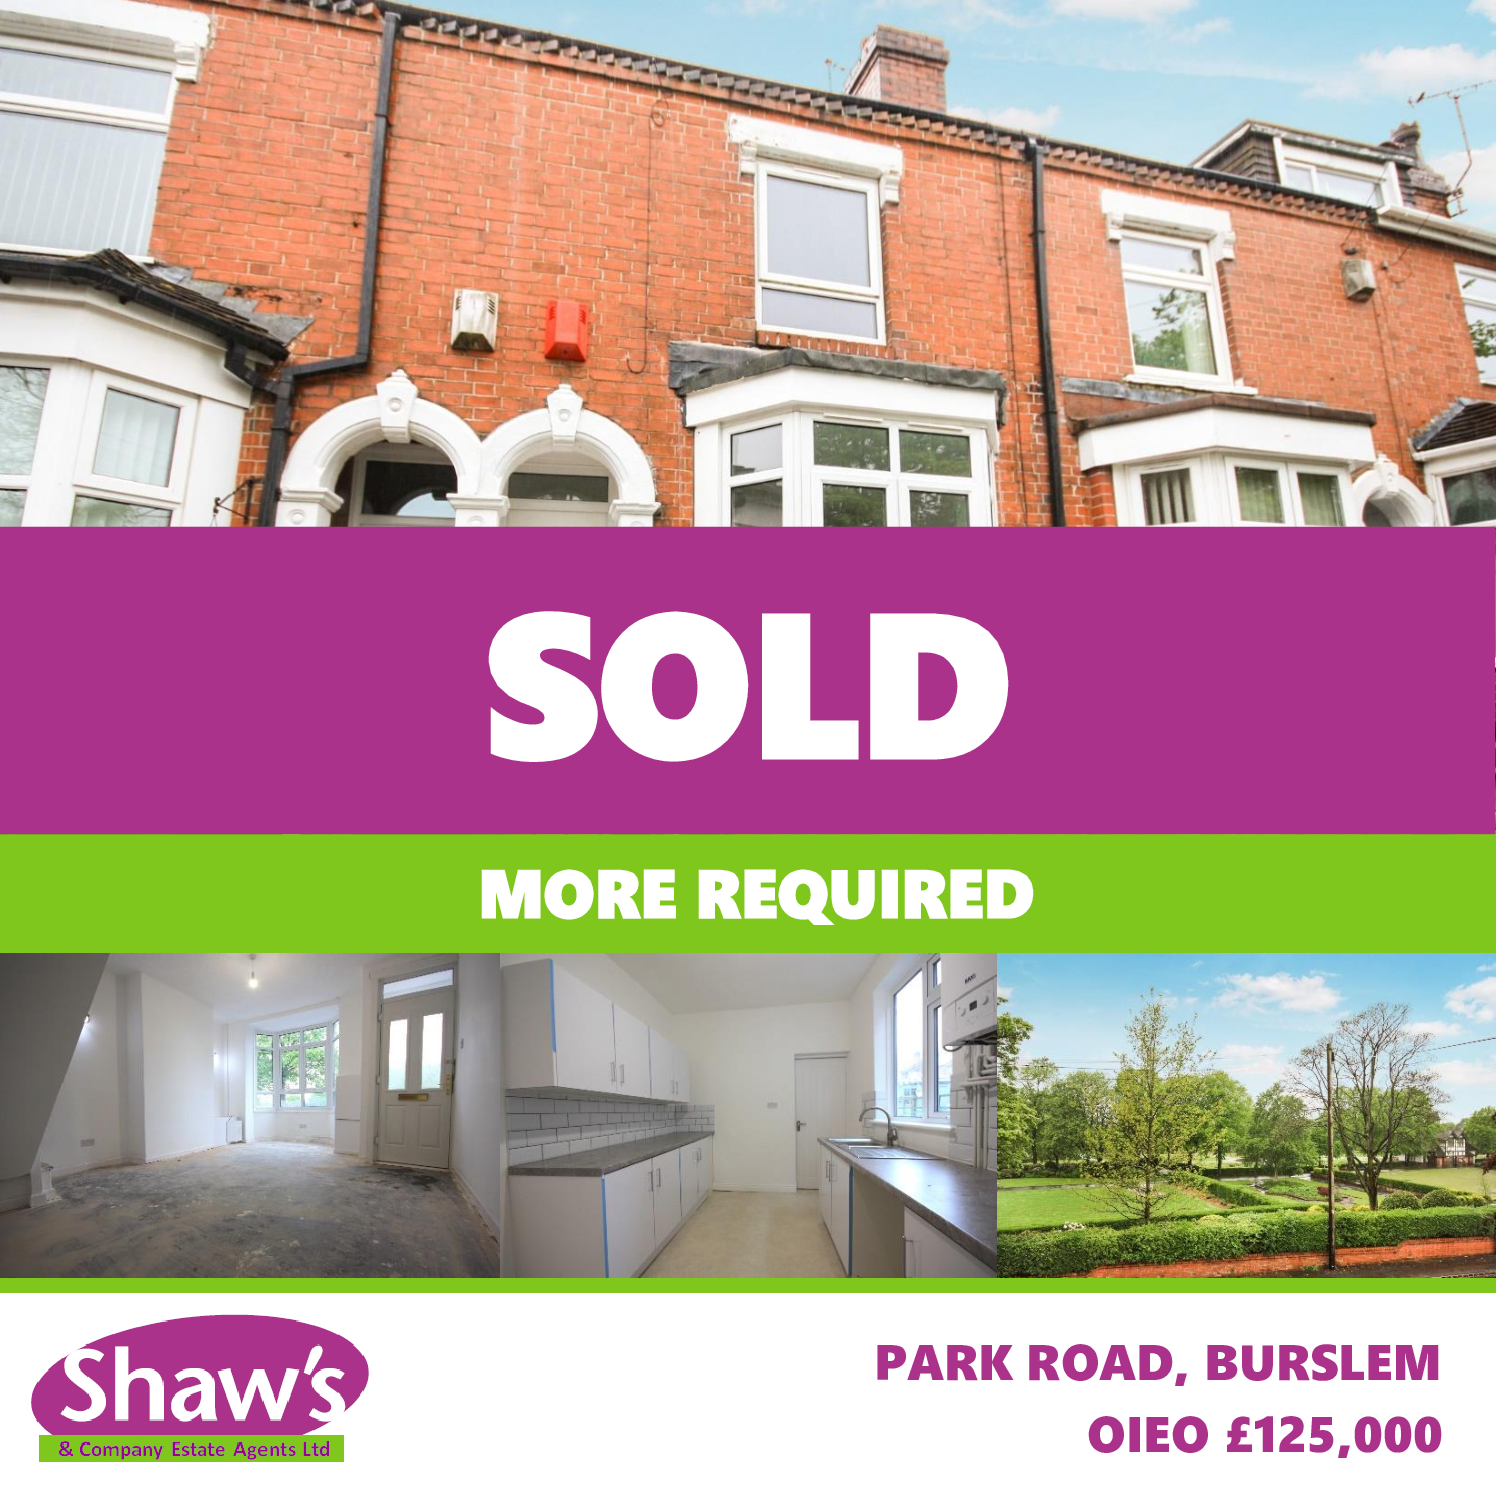 ALL SOLD!